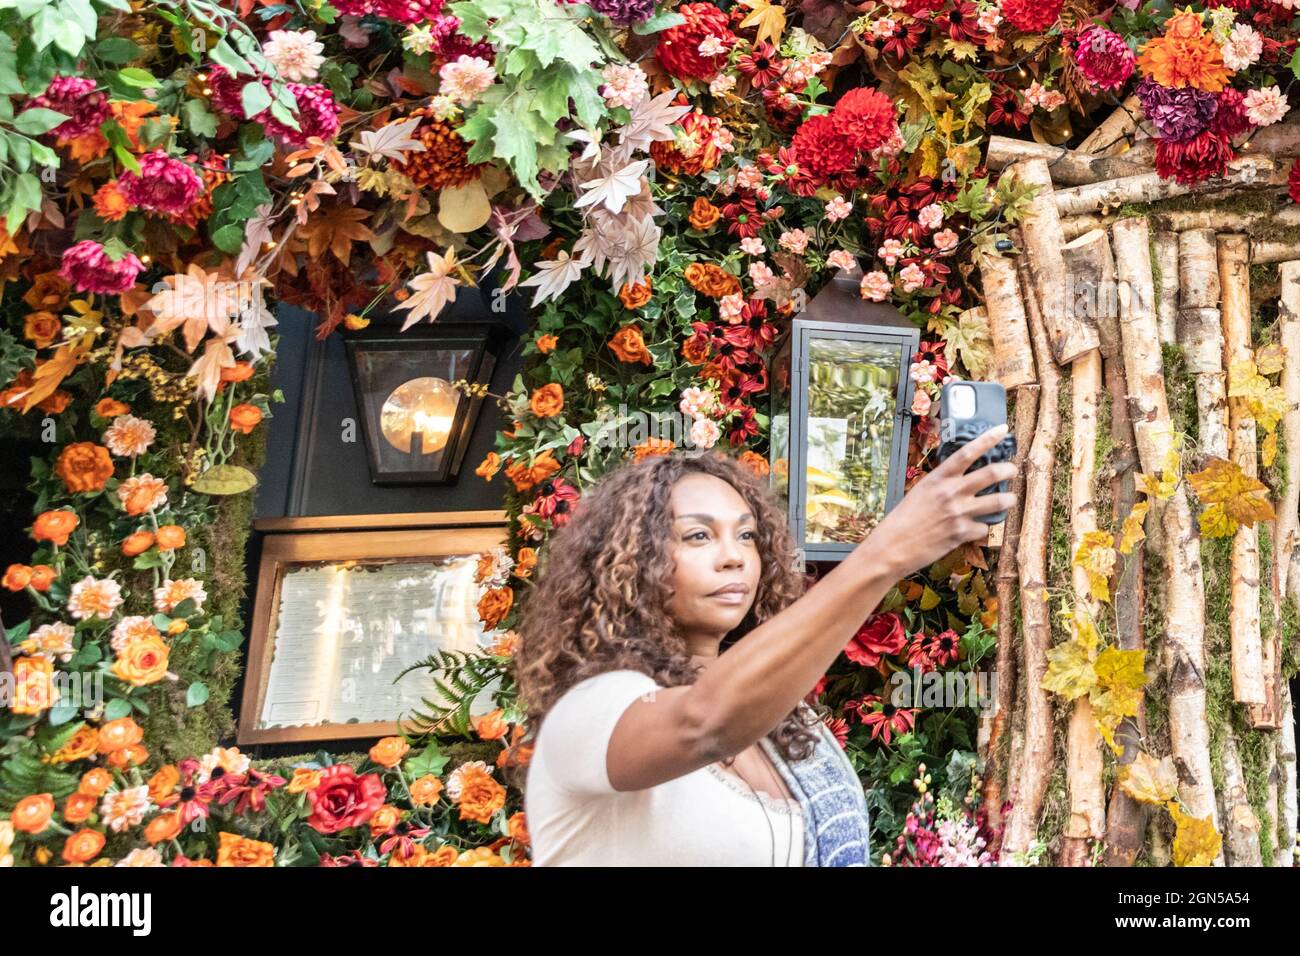 London, UK. 22nd Sep, 2021. A woman takes selfies with the very colourful display at the Ivy restaurant on King´s Road. Chelsea in Bloom is an annual festival and competition of floral and plant displays by participating shops, restaurants and other businesses in Chelsea, this year running Sep 20-25. Credit: Imageplotter/Alamy Live News Stock Photo